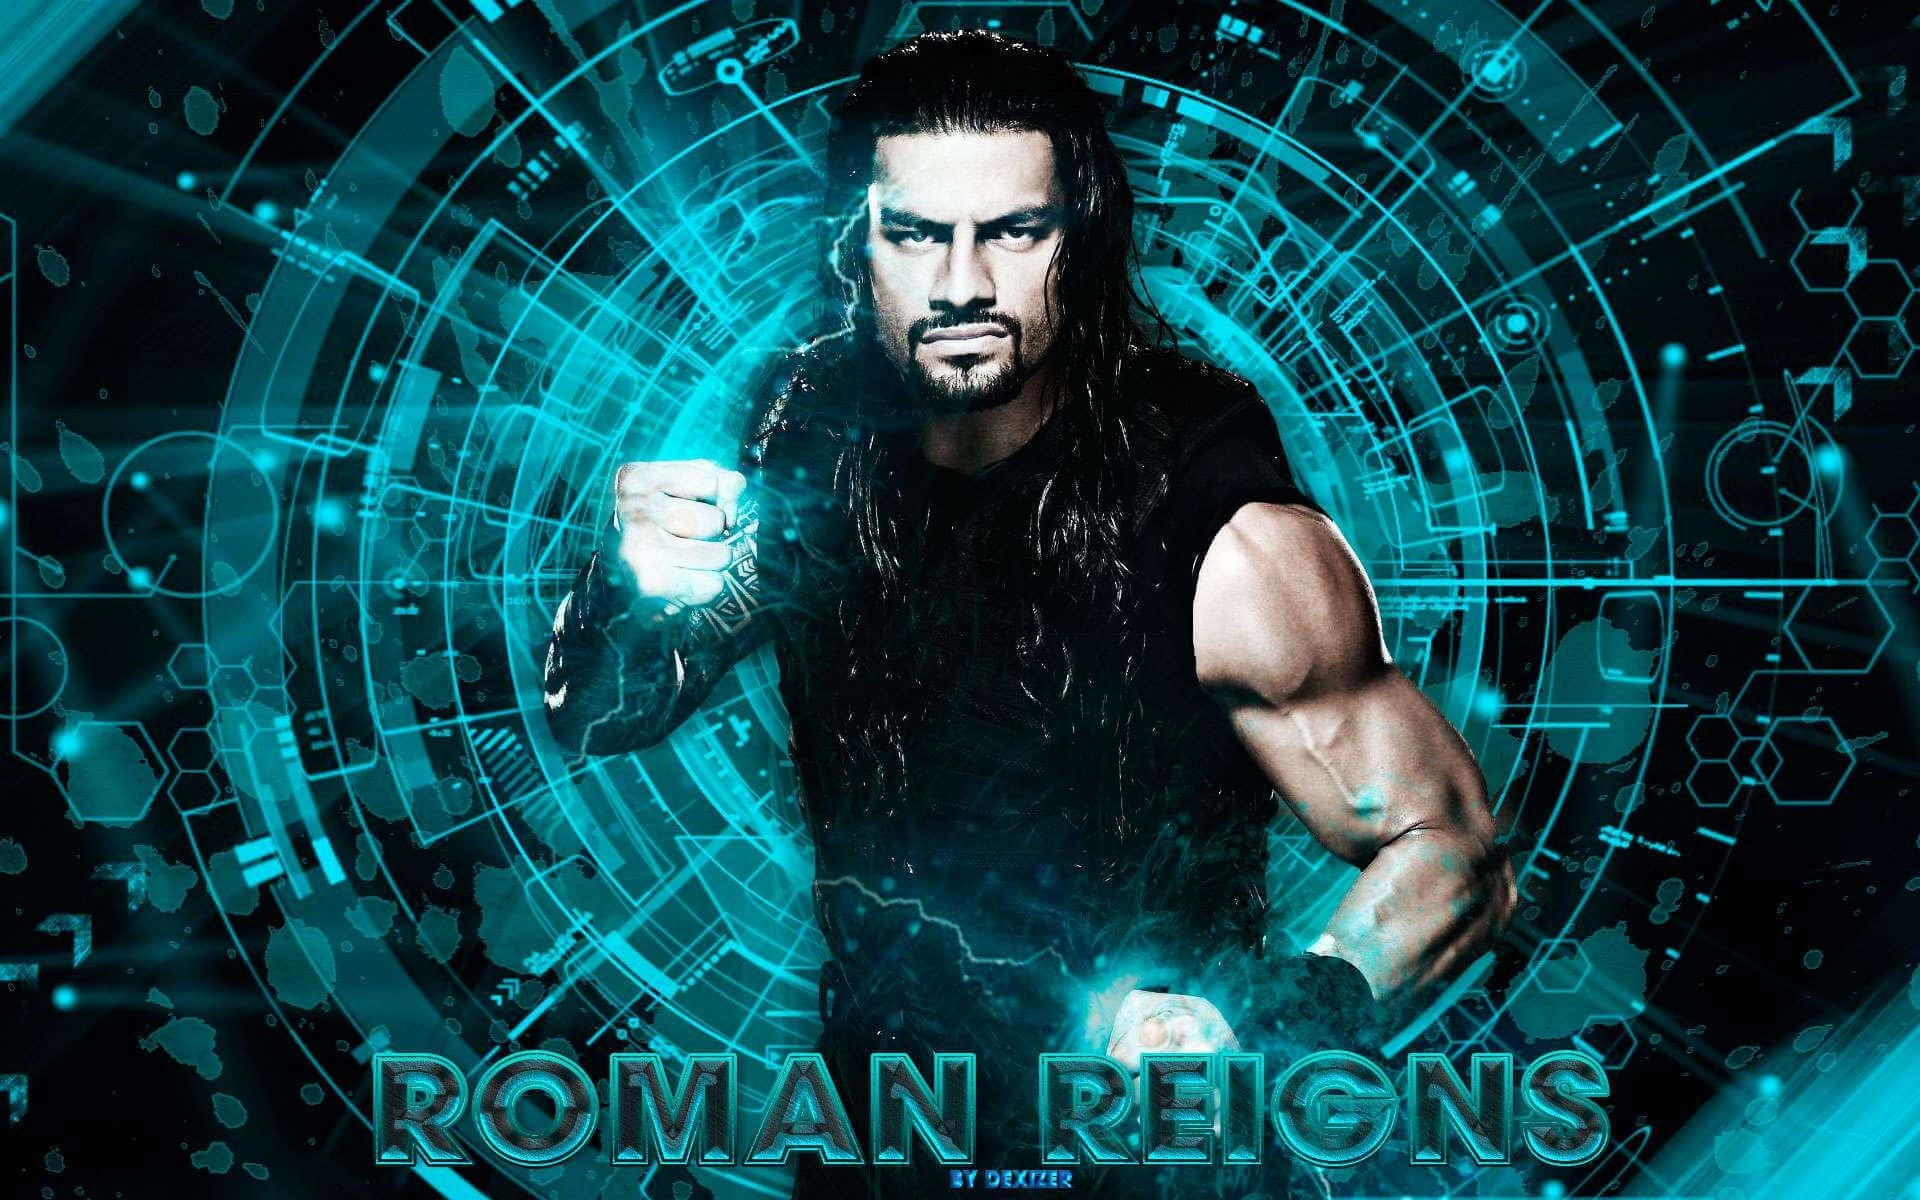 roman reigns hd wallpaper download,graphic design,photography,cool,fictional character,graphics